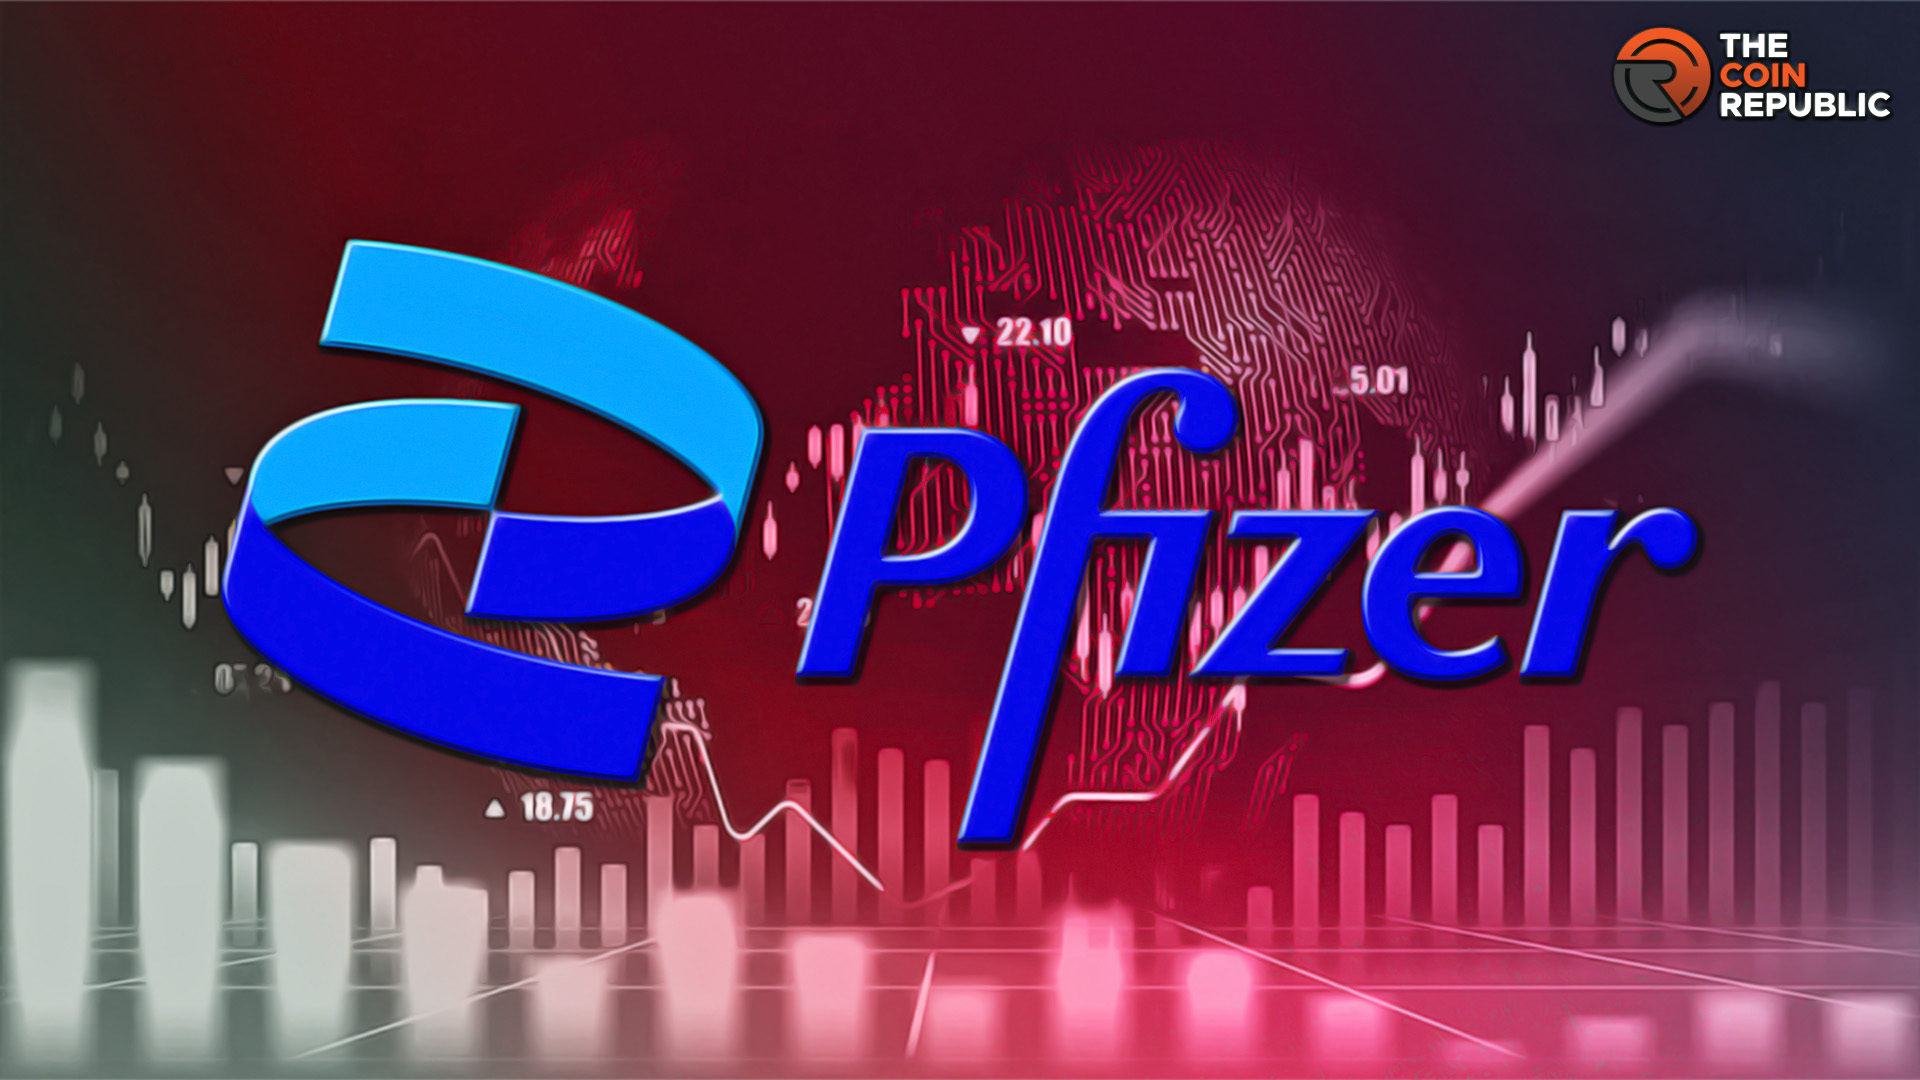 Pfizer Stock Price Prediction: Will PFE Rise From Ashes For $40?